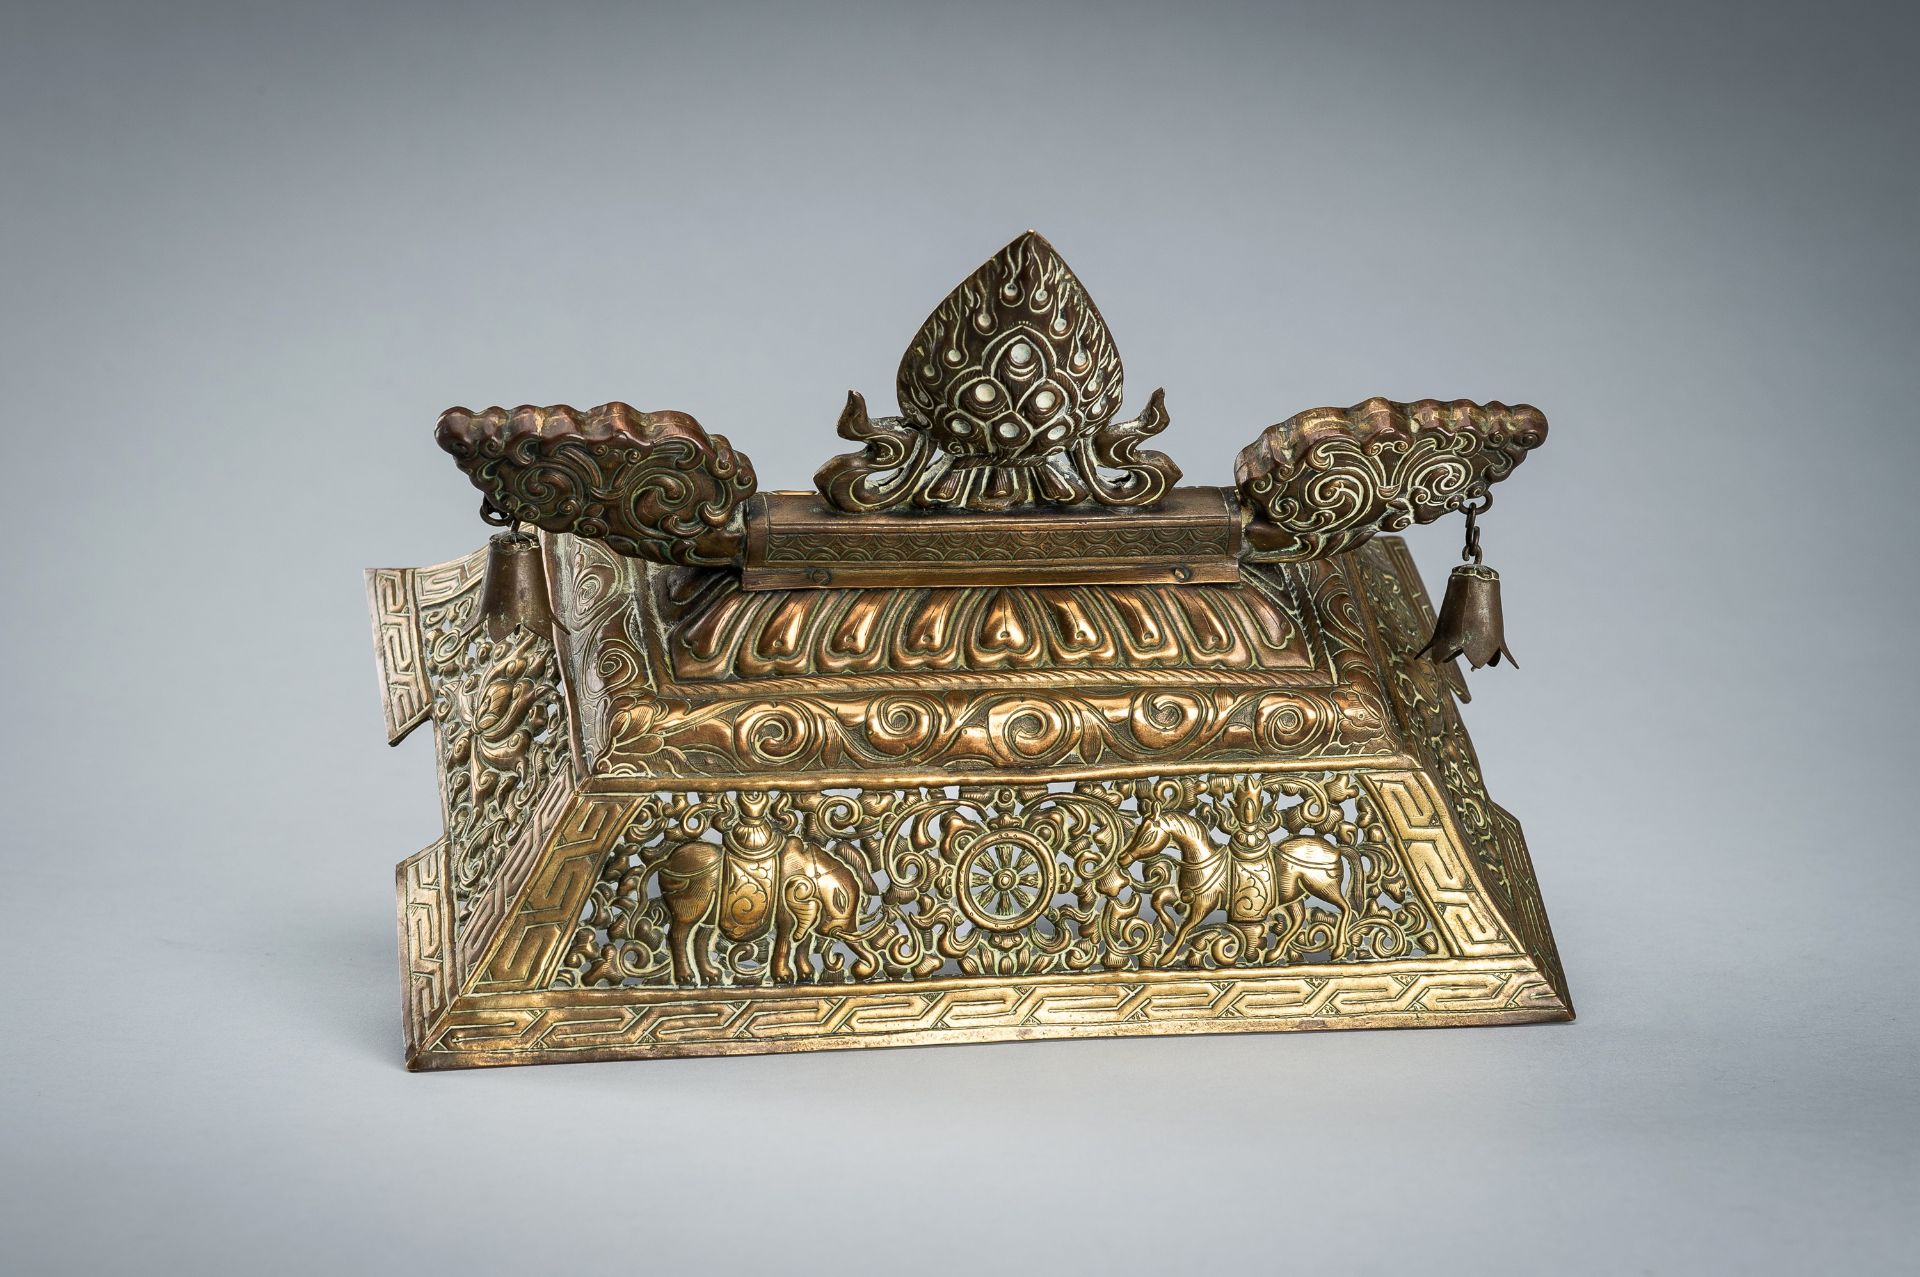 A GILT COPPER REPOUSSE CENSER AND RETICULATED COVER, FANGDING, QING DYNASTY - Image 15 of 20